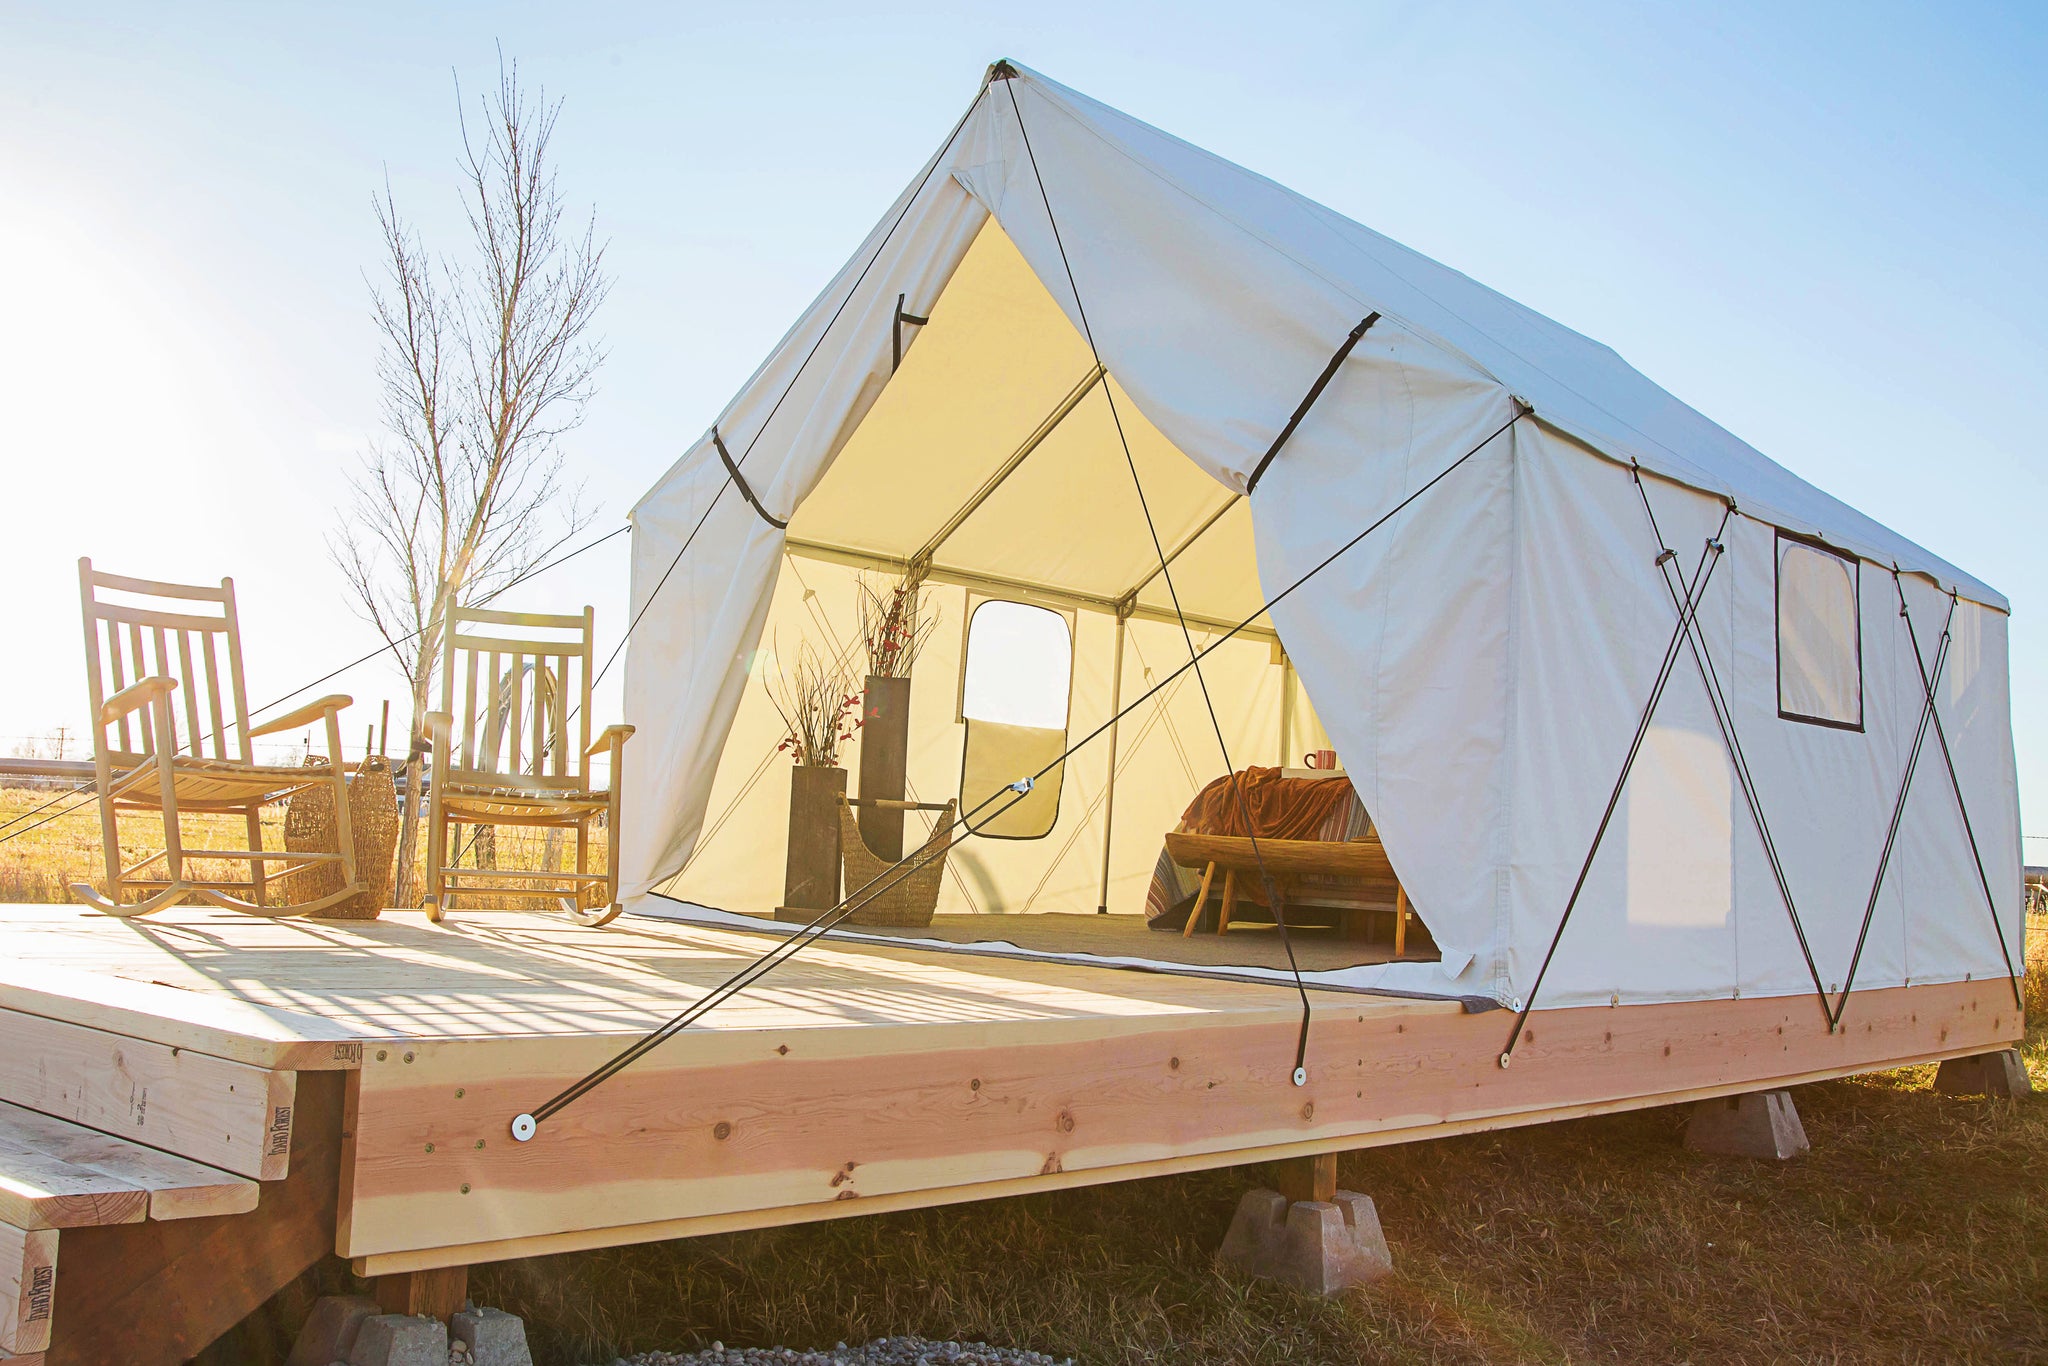 Wall Tent Shop Luxury Tents for sale on Platform with Large Deck